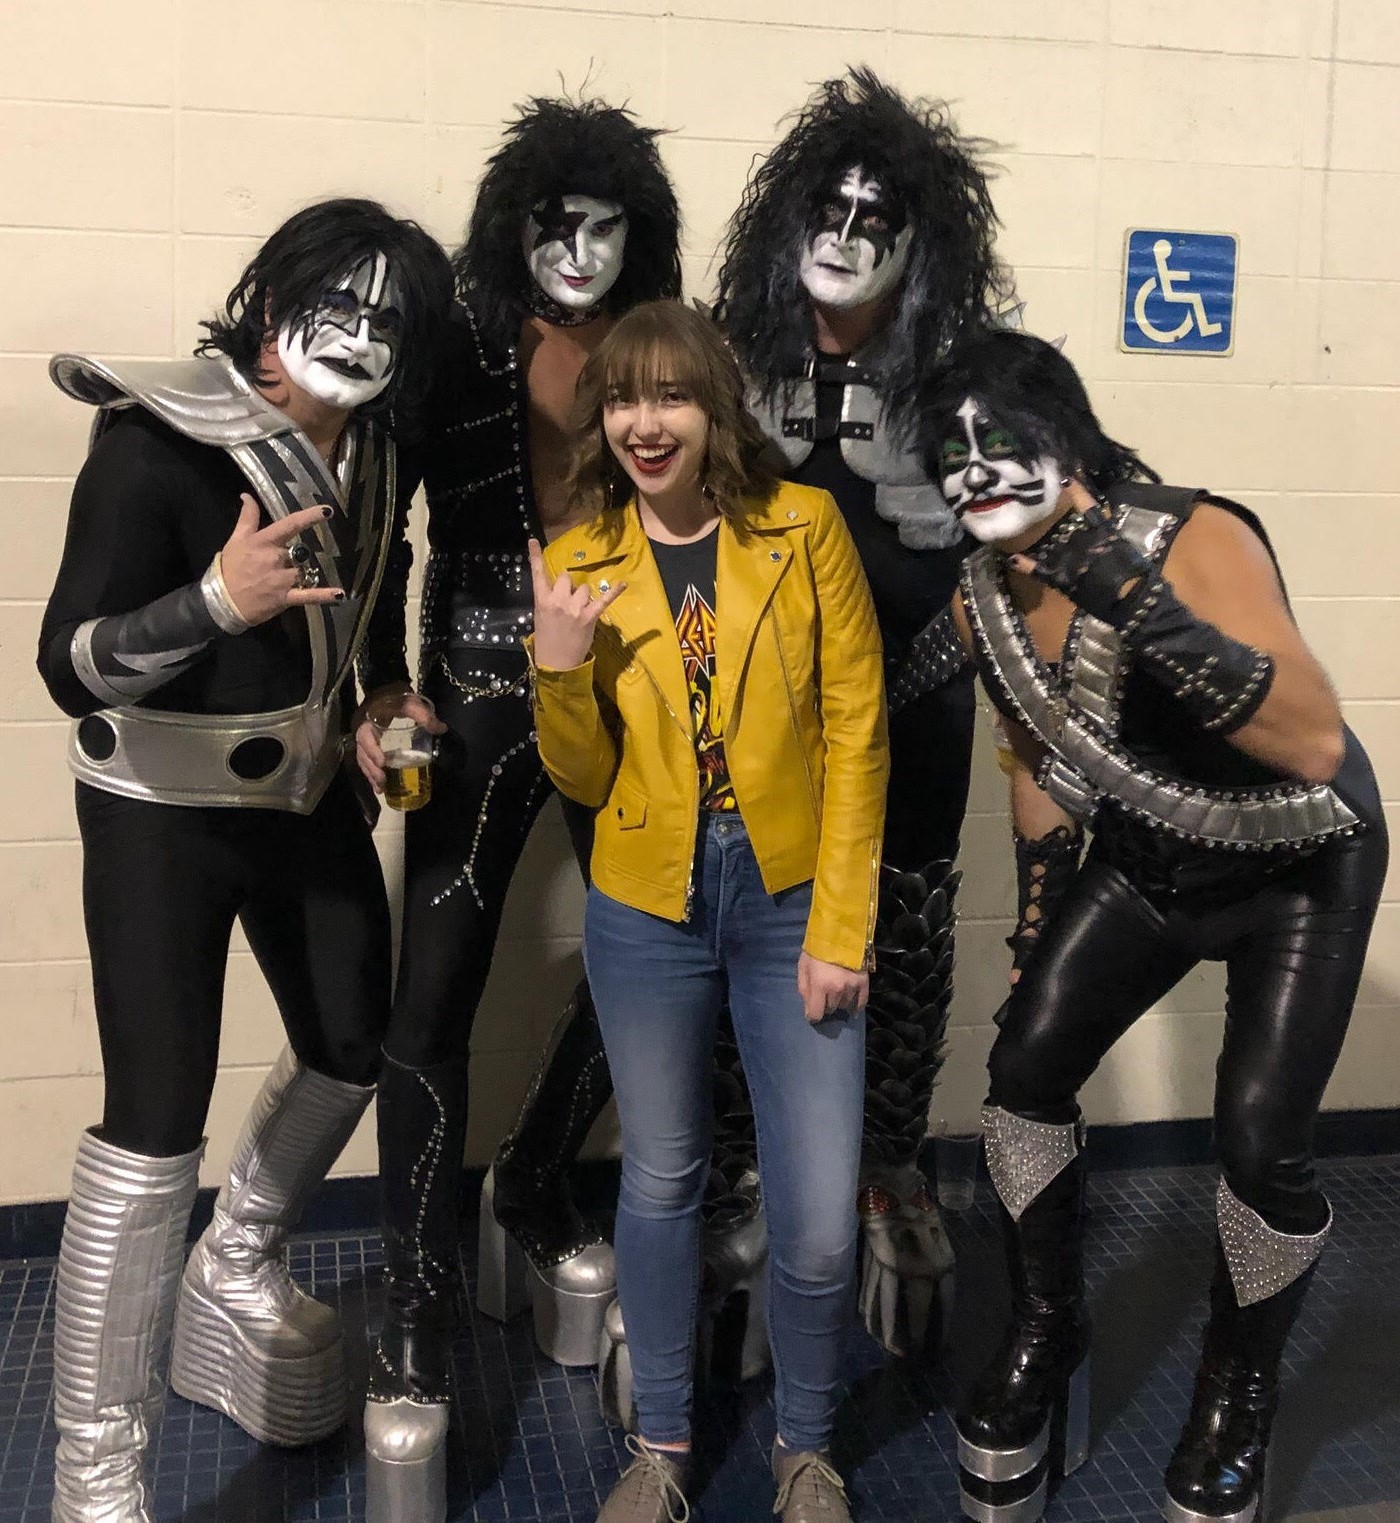 Noelle posing with people dressed as the band Kiss